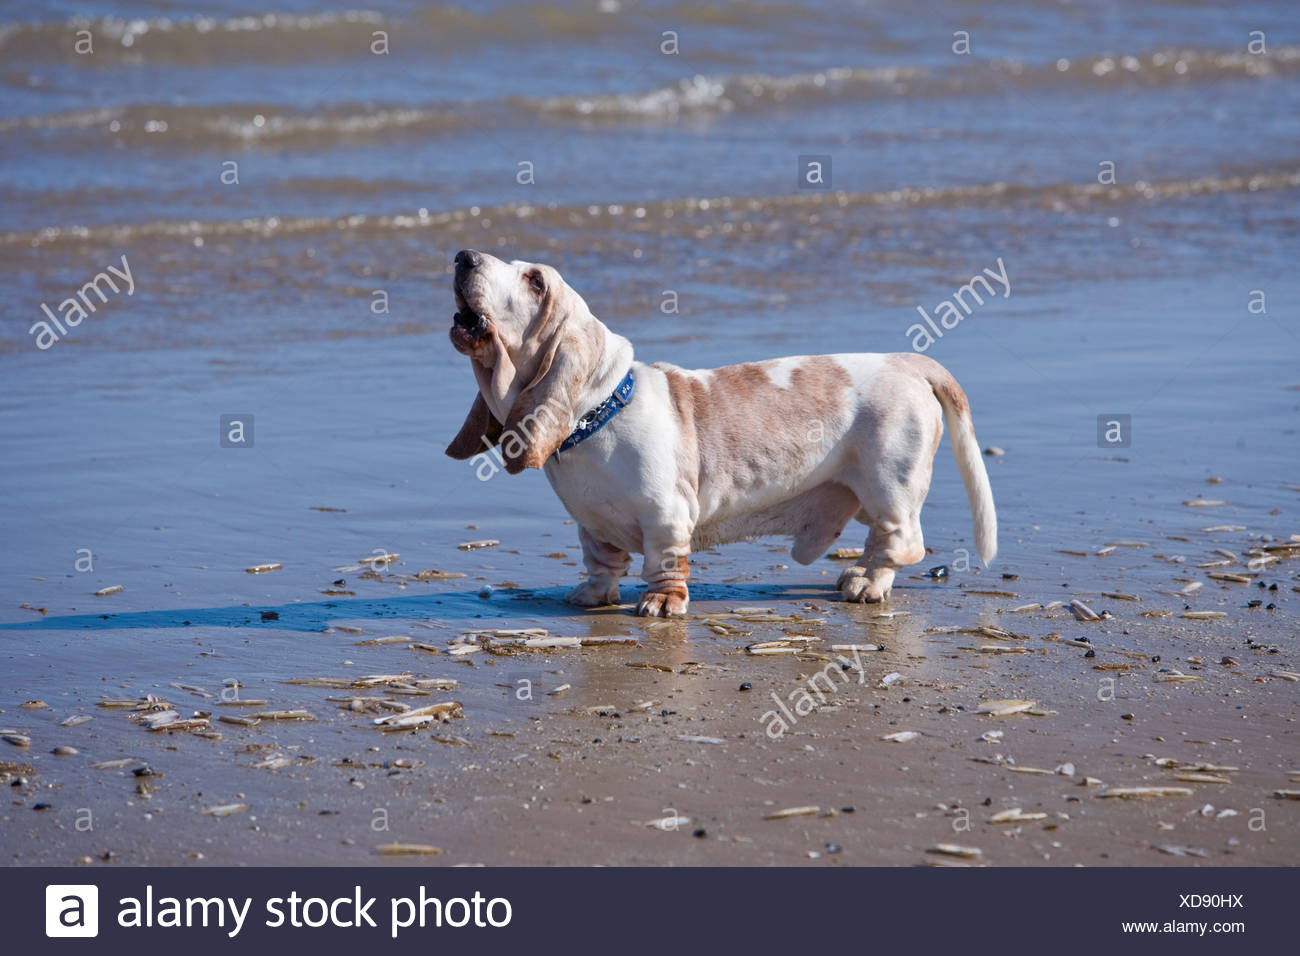 basset hounds baying on the beach - Stock Image